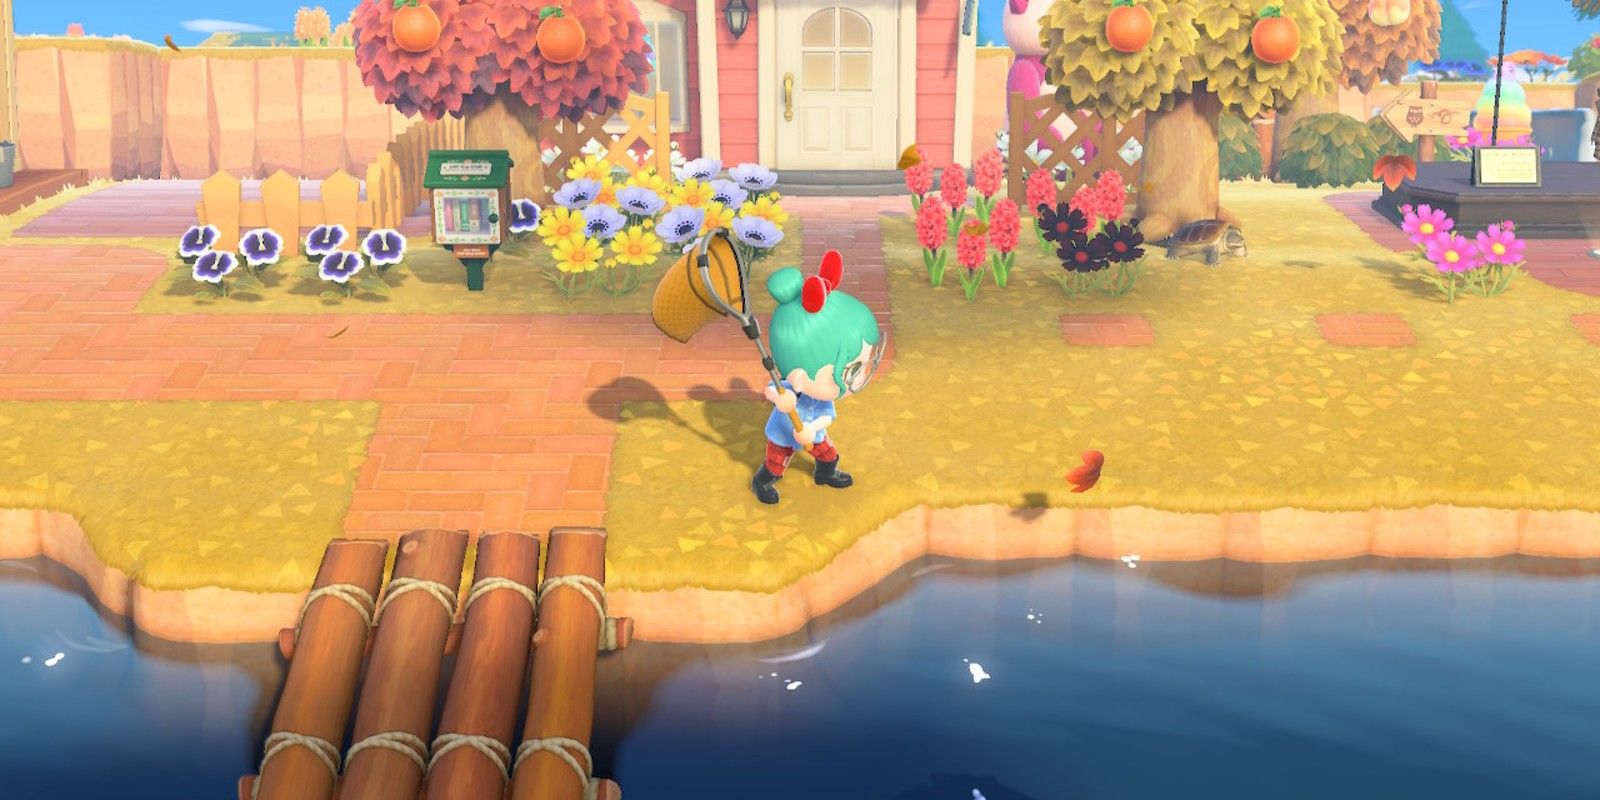 How to Find The New Maple Leaf DIY Recipes in Animal Crossing